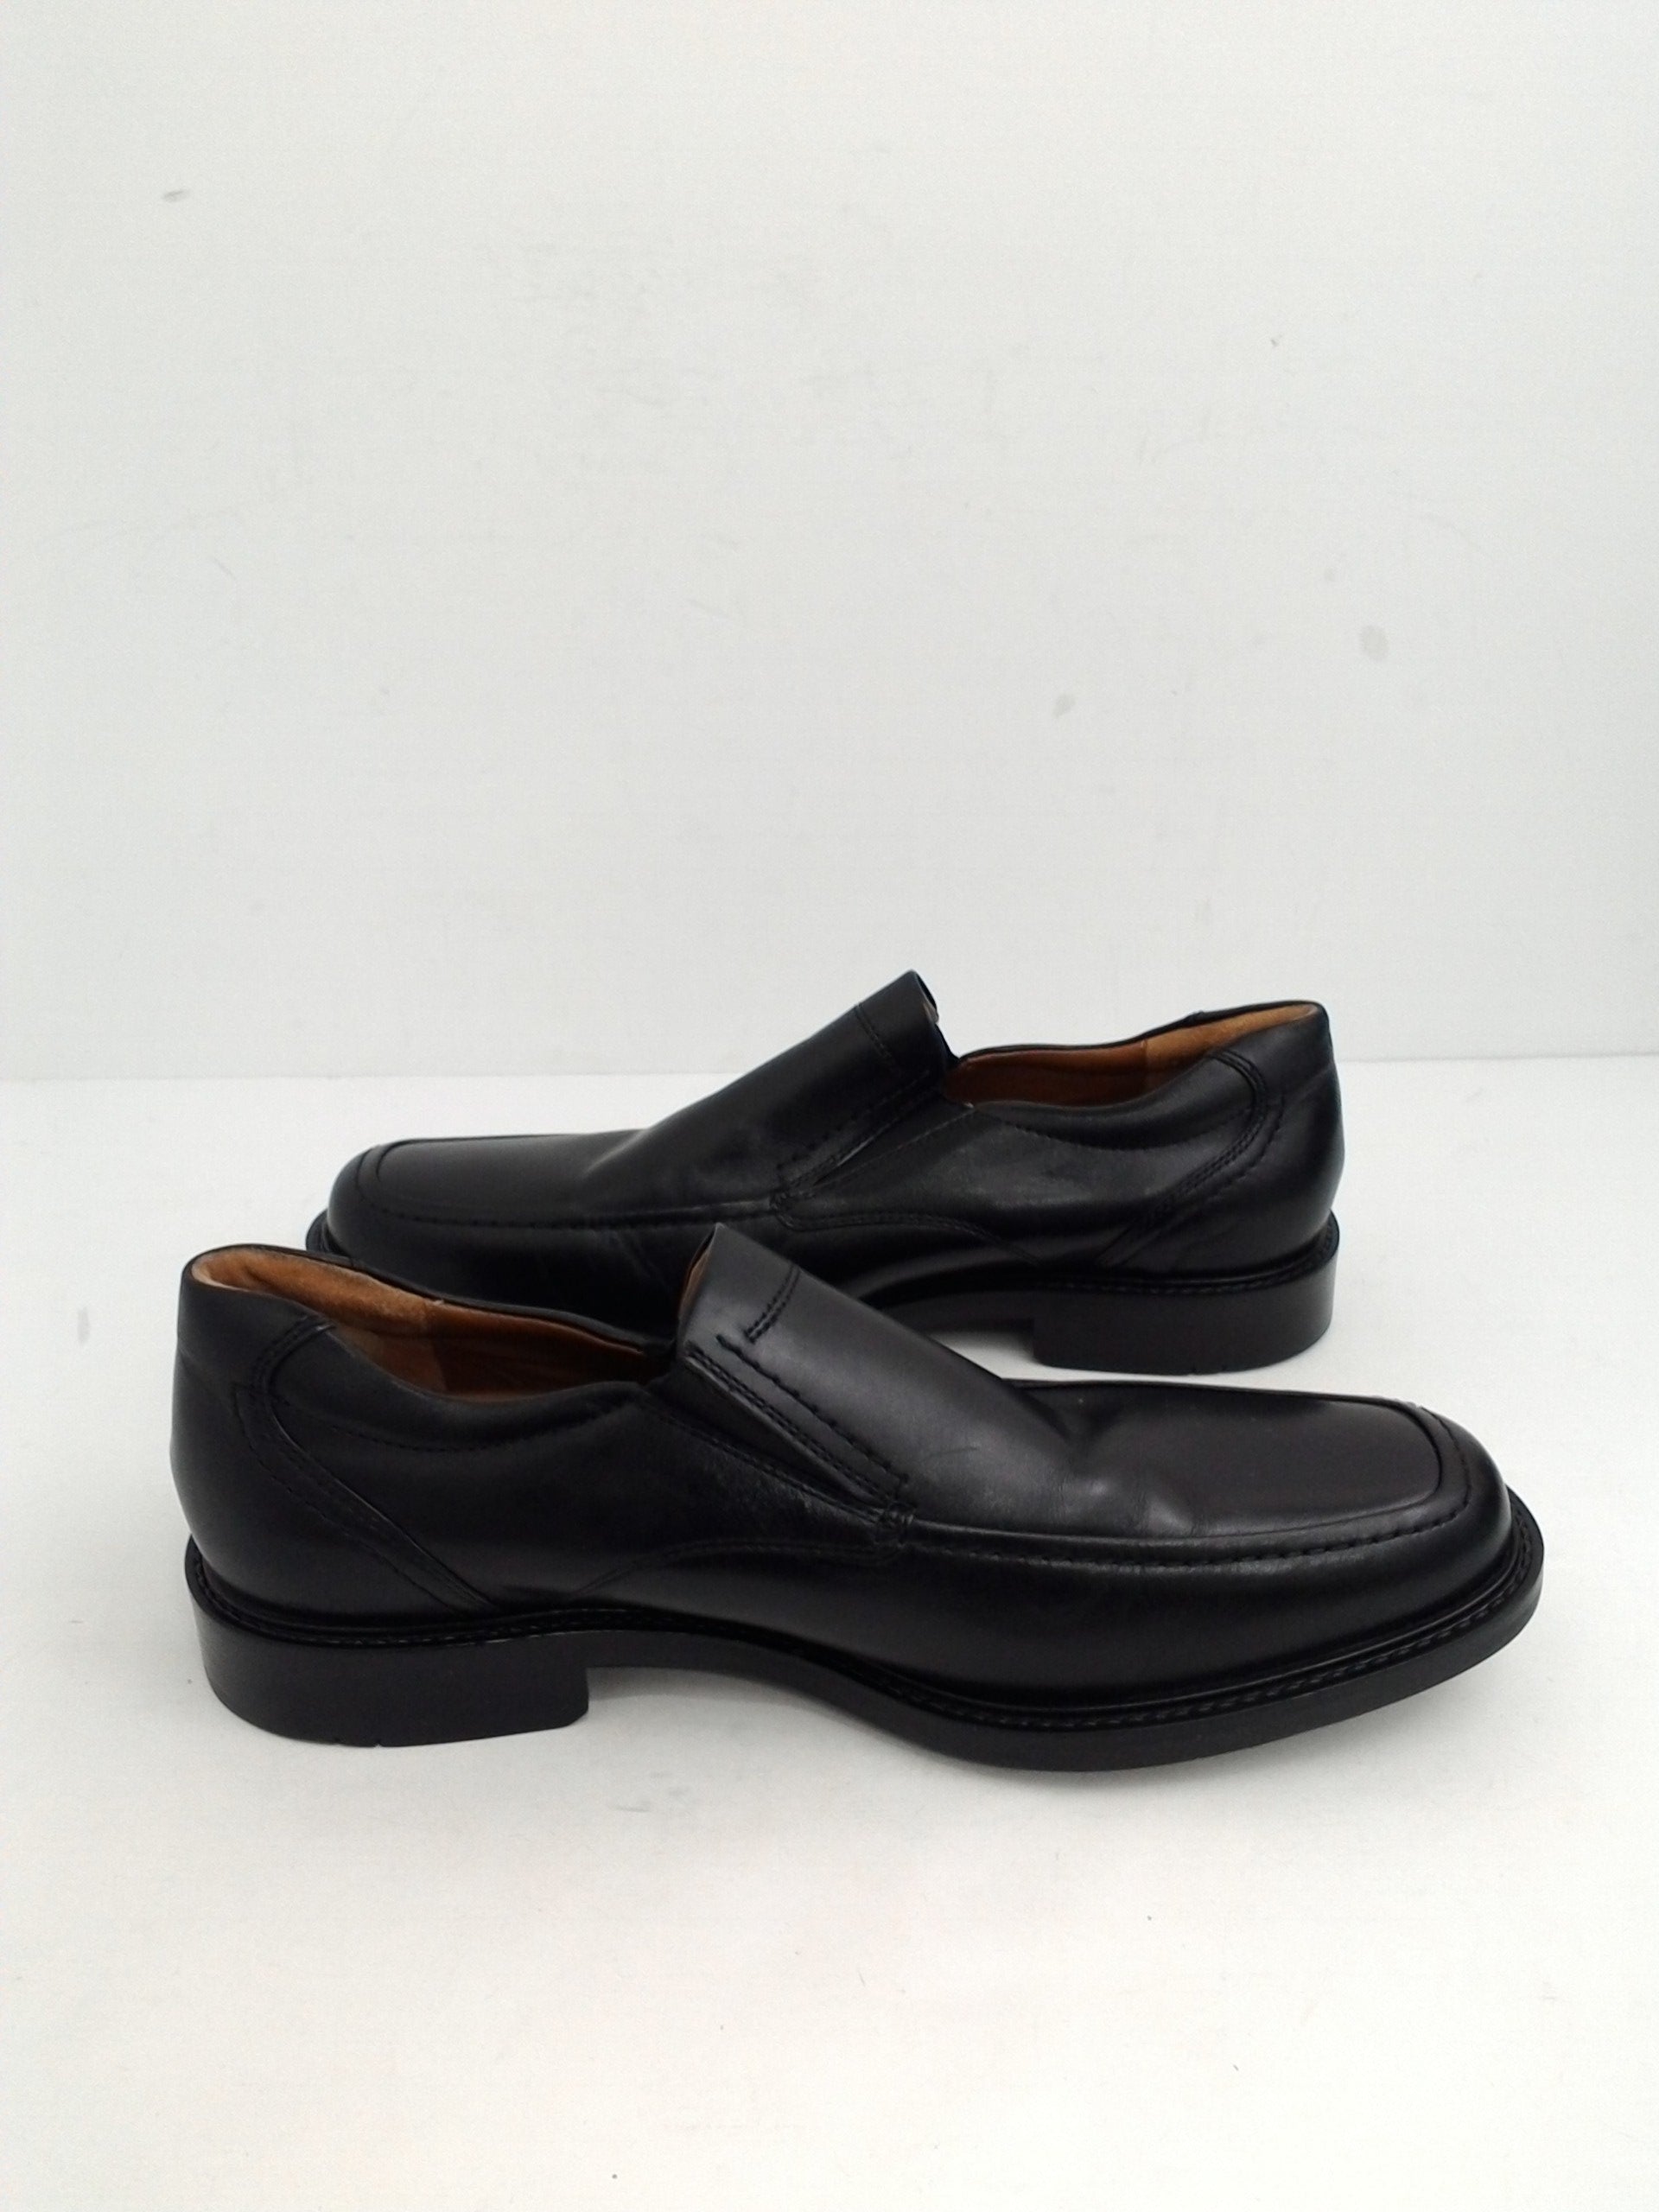 Johnson & Murphy Men's Tabor Loafers, Black, Leather, Size 9.5 M ...